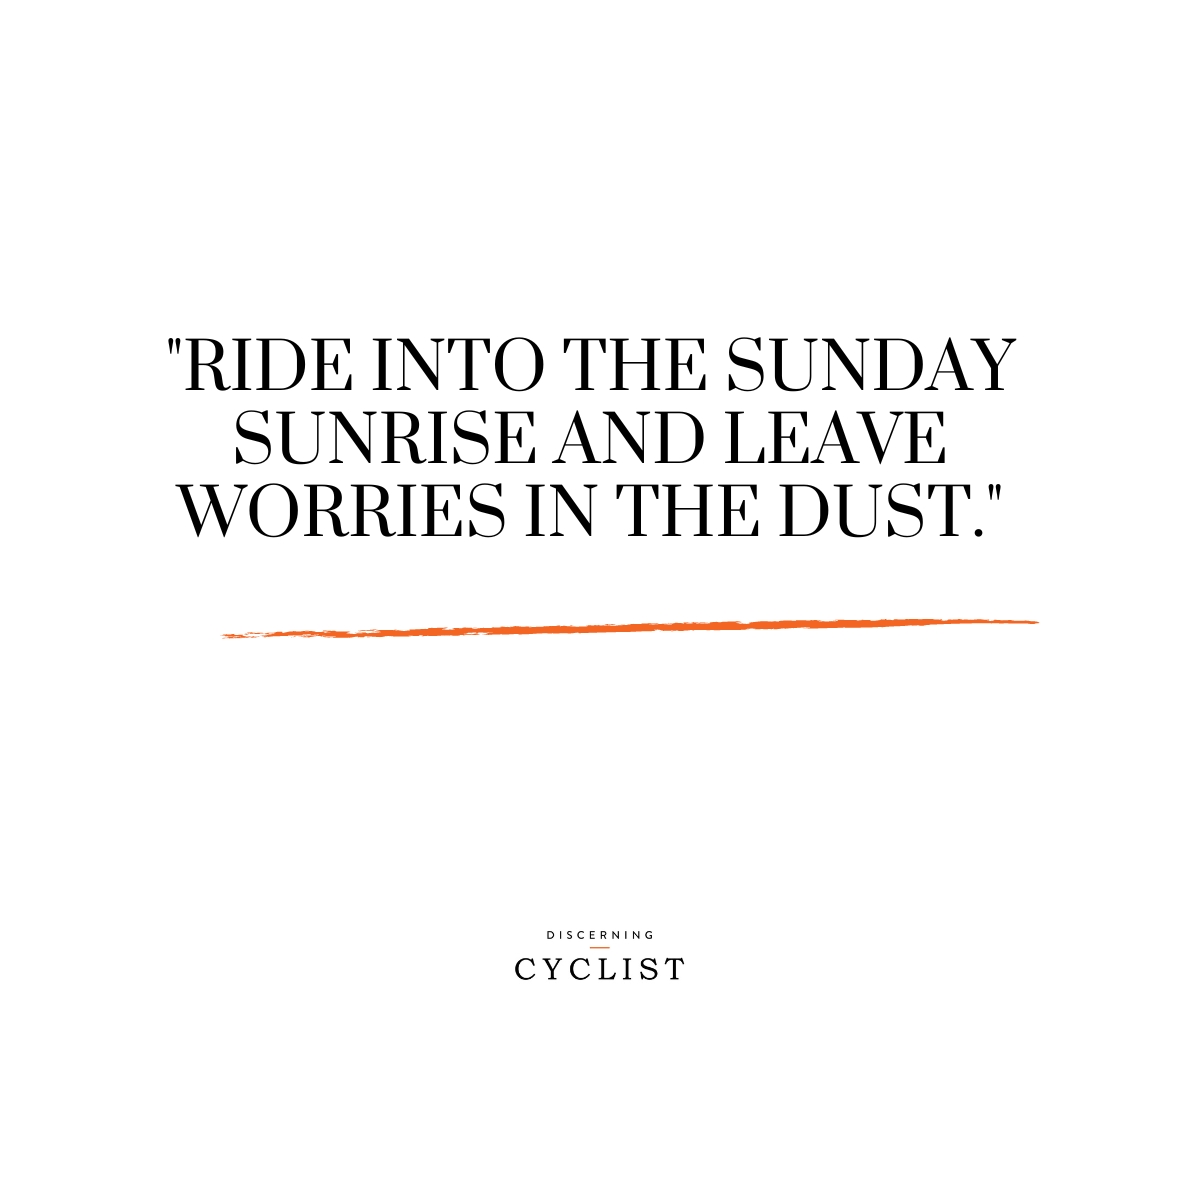 "Ride into the Sunday sunrise and leave worries in the dust."